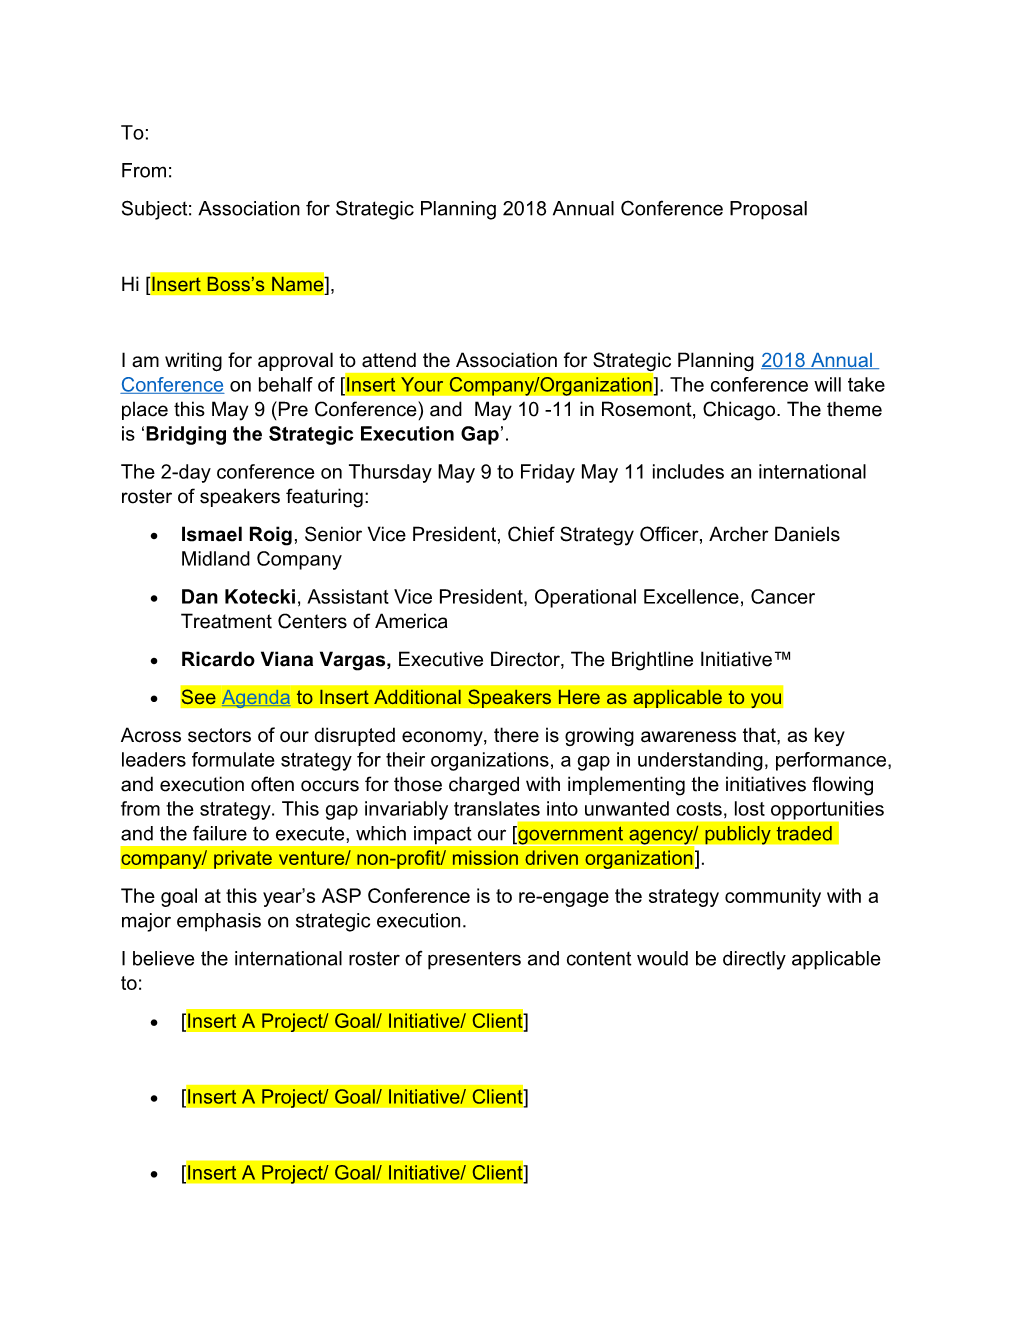 Subject: Association for Strategic Planning 2018 Annual Conference Proposal